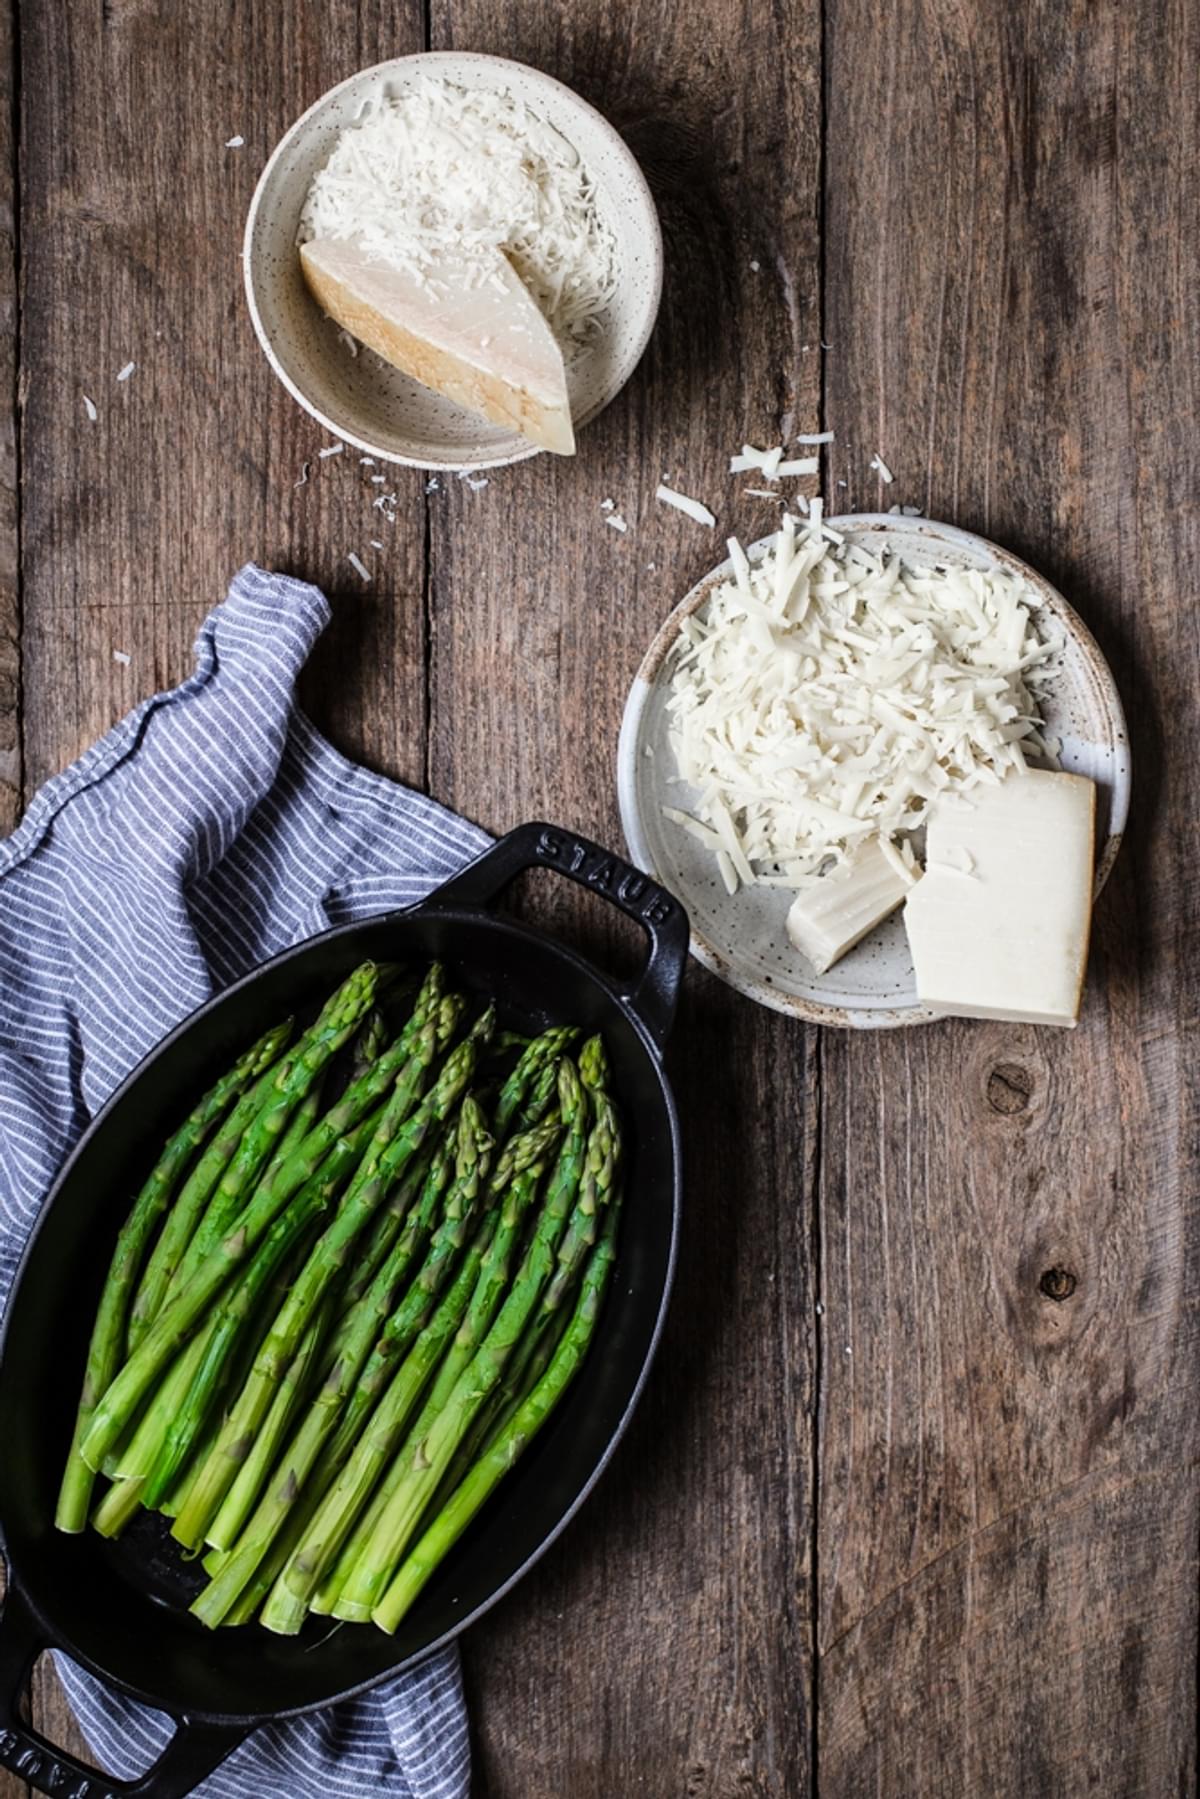 blanched asparagus in a cast iron baking dish next to a plate of grated gruyère cheese